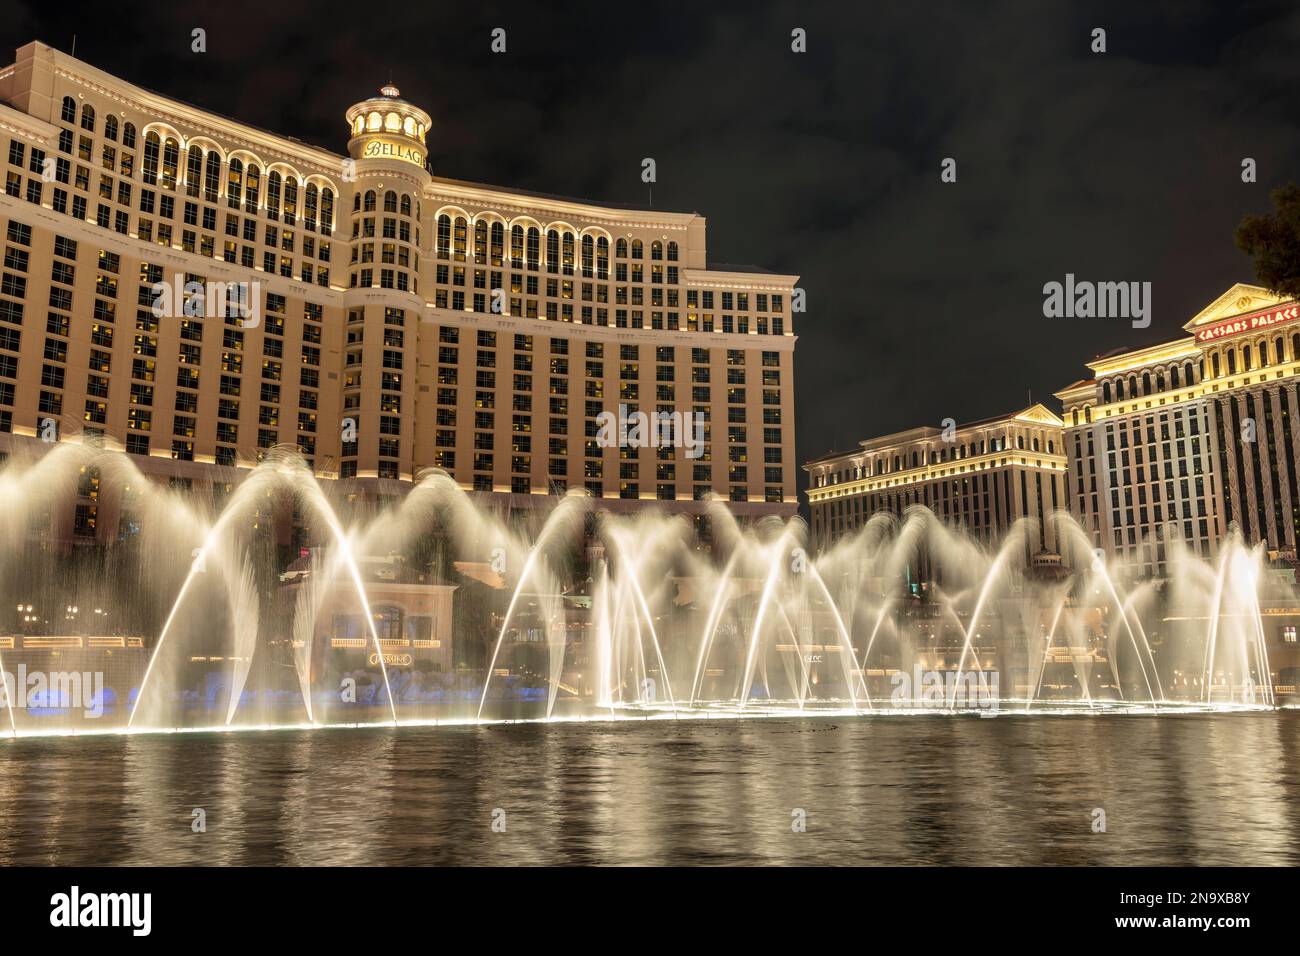 Night view of the famous Bellagio fountains at the Las Vegas Strip, Nevada USA. Stock Photo